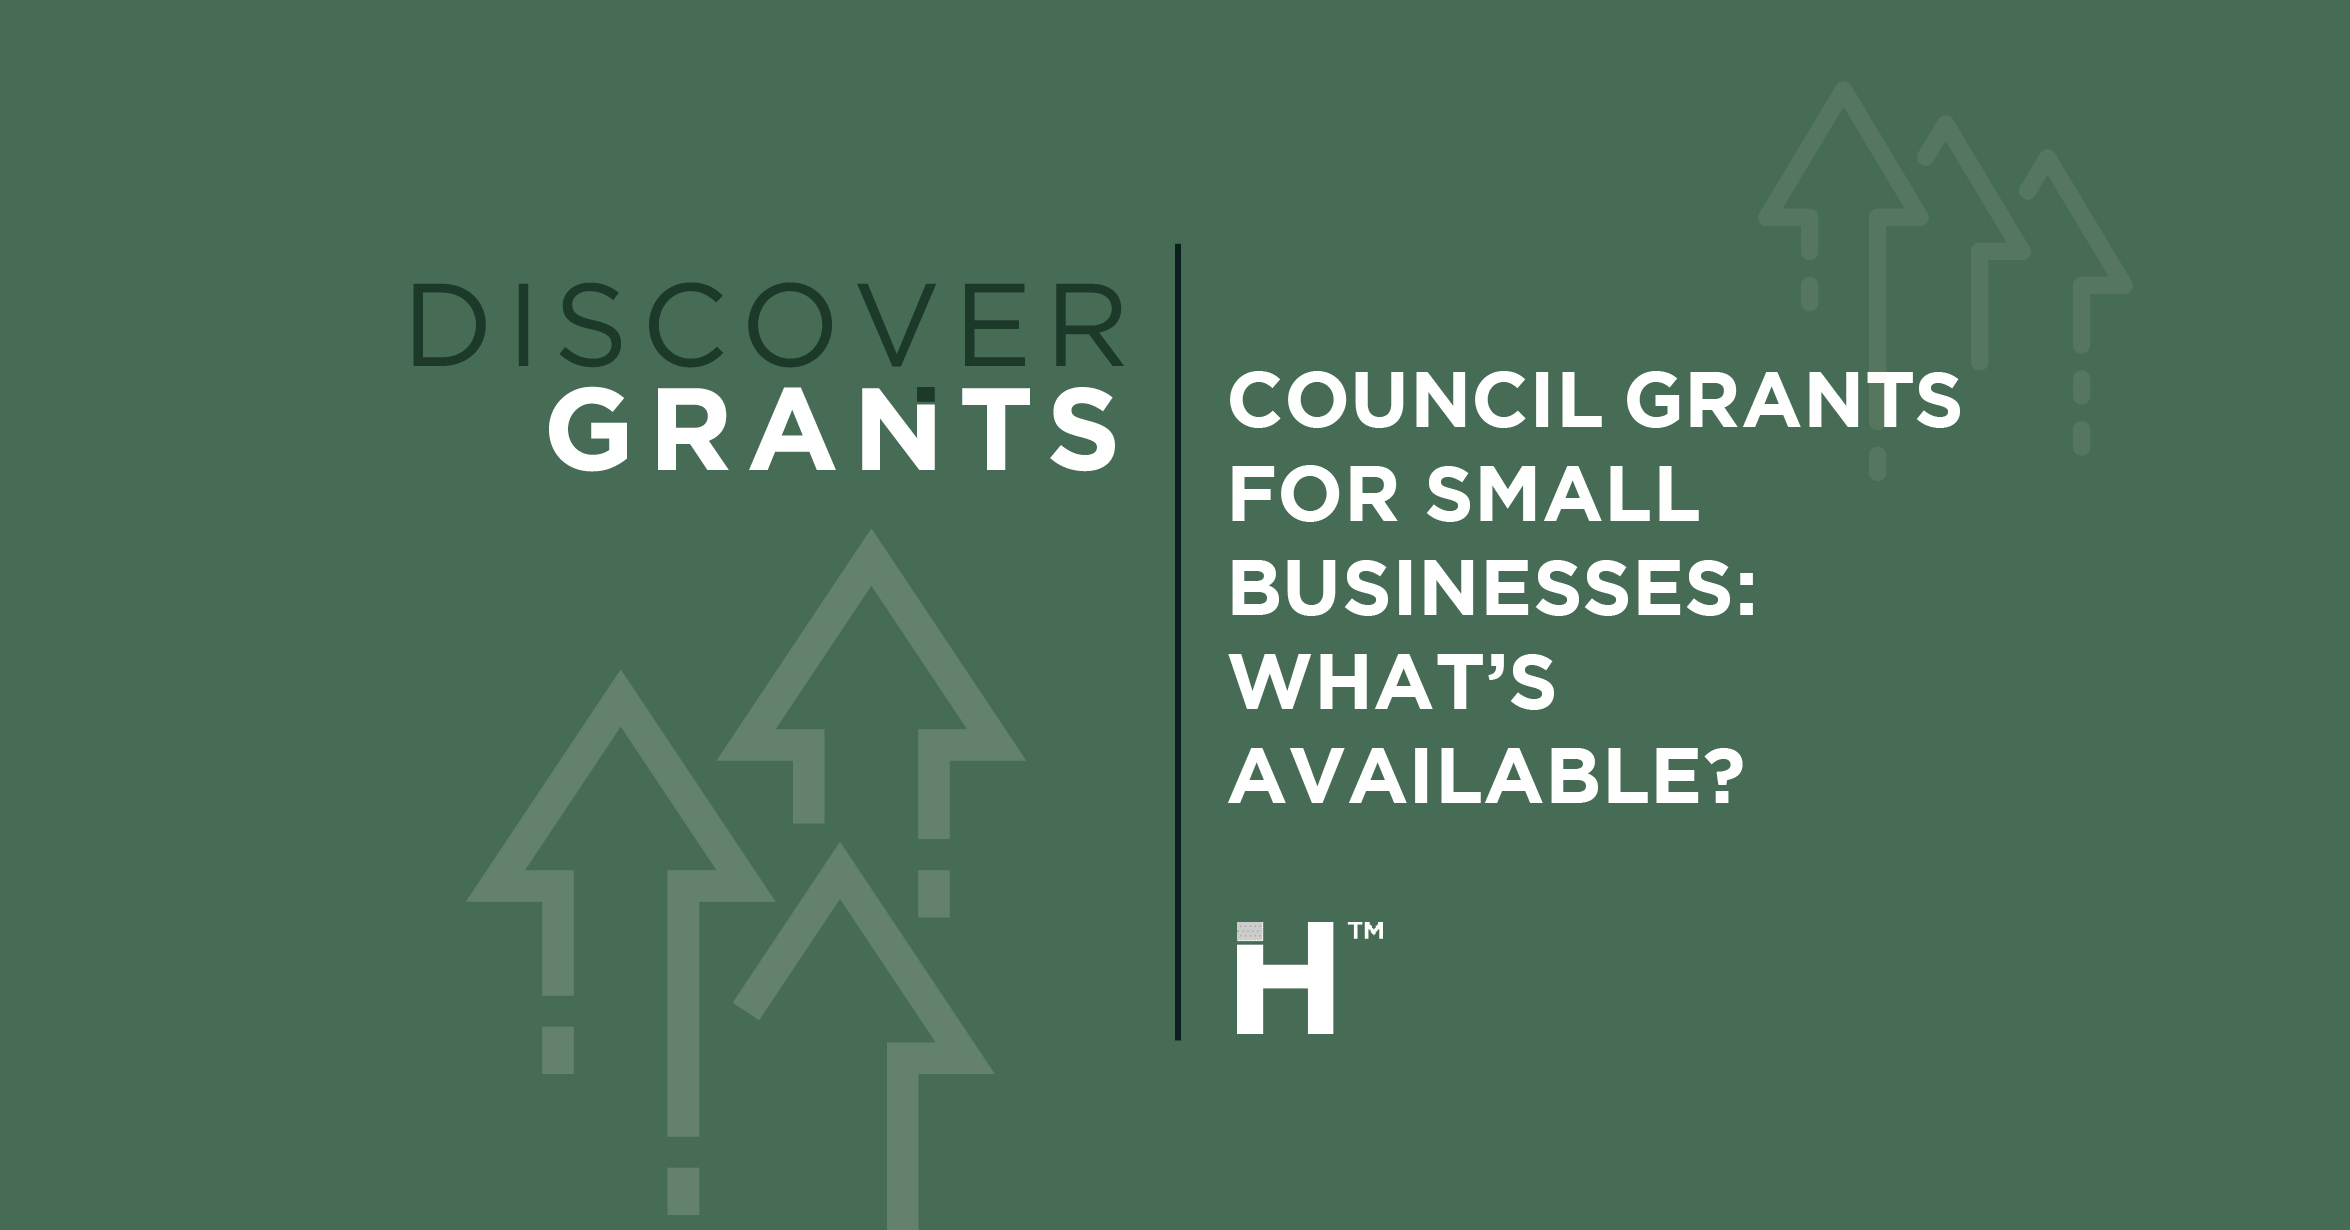 Council Grants for Small Businesses: What’s Available?